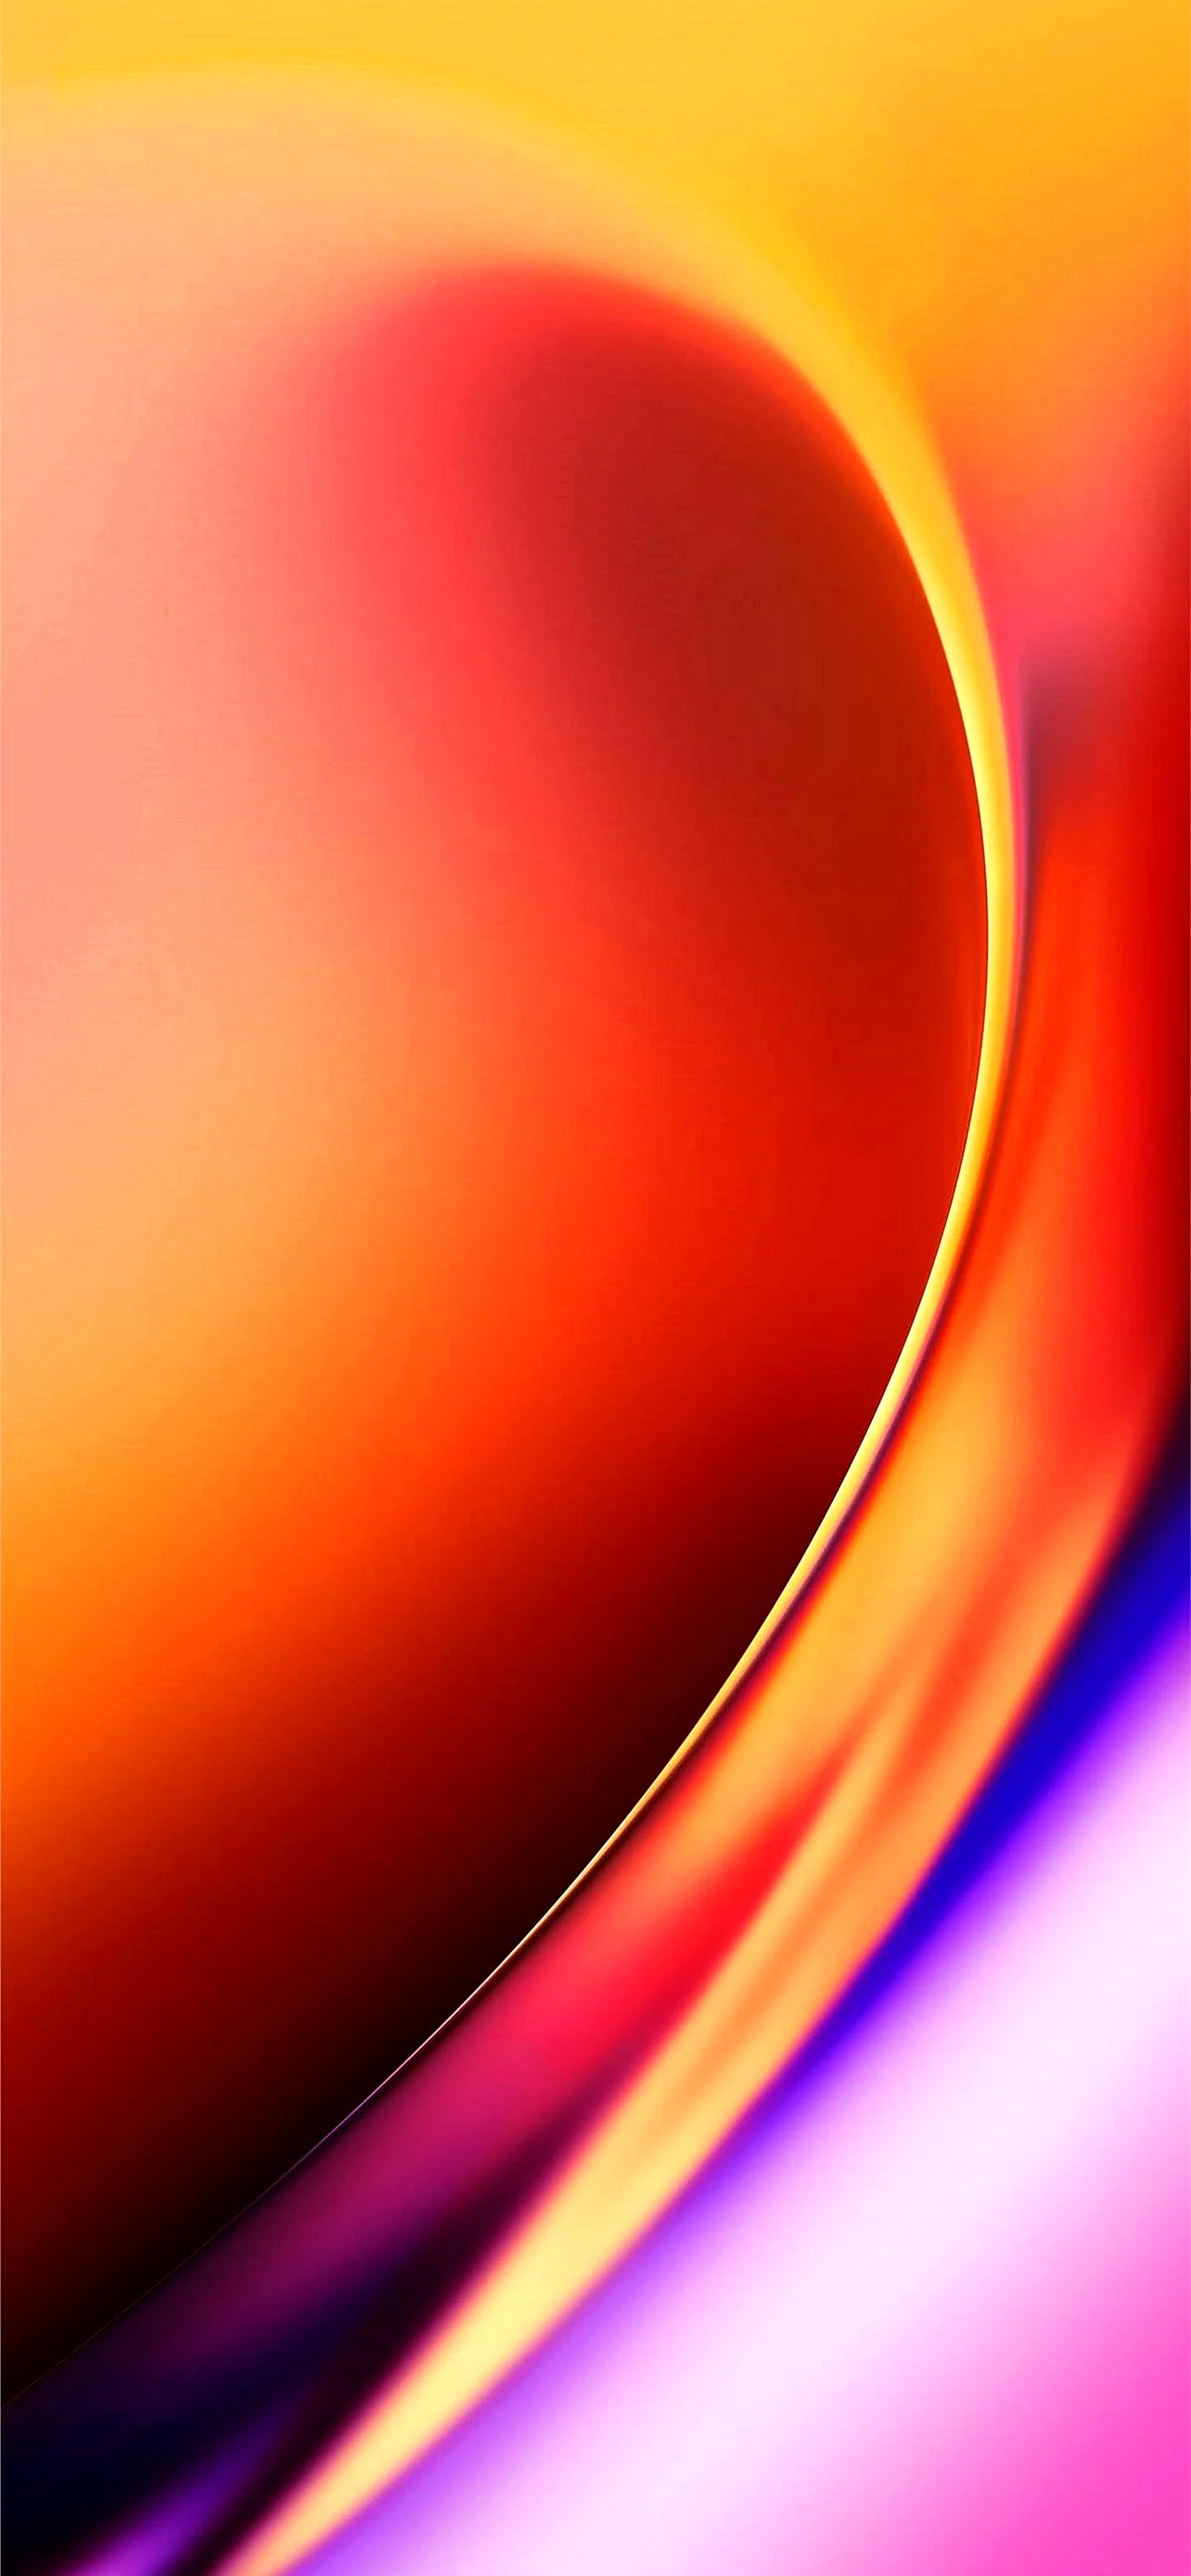 Oneplus Wallpaper for iPhone 12 Pro Max